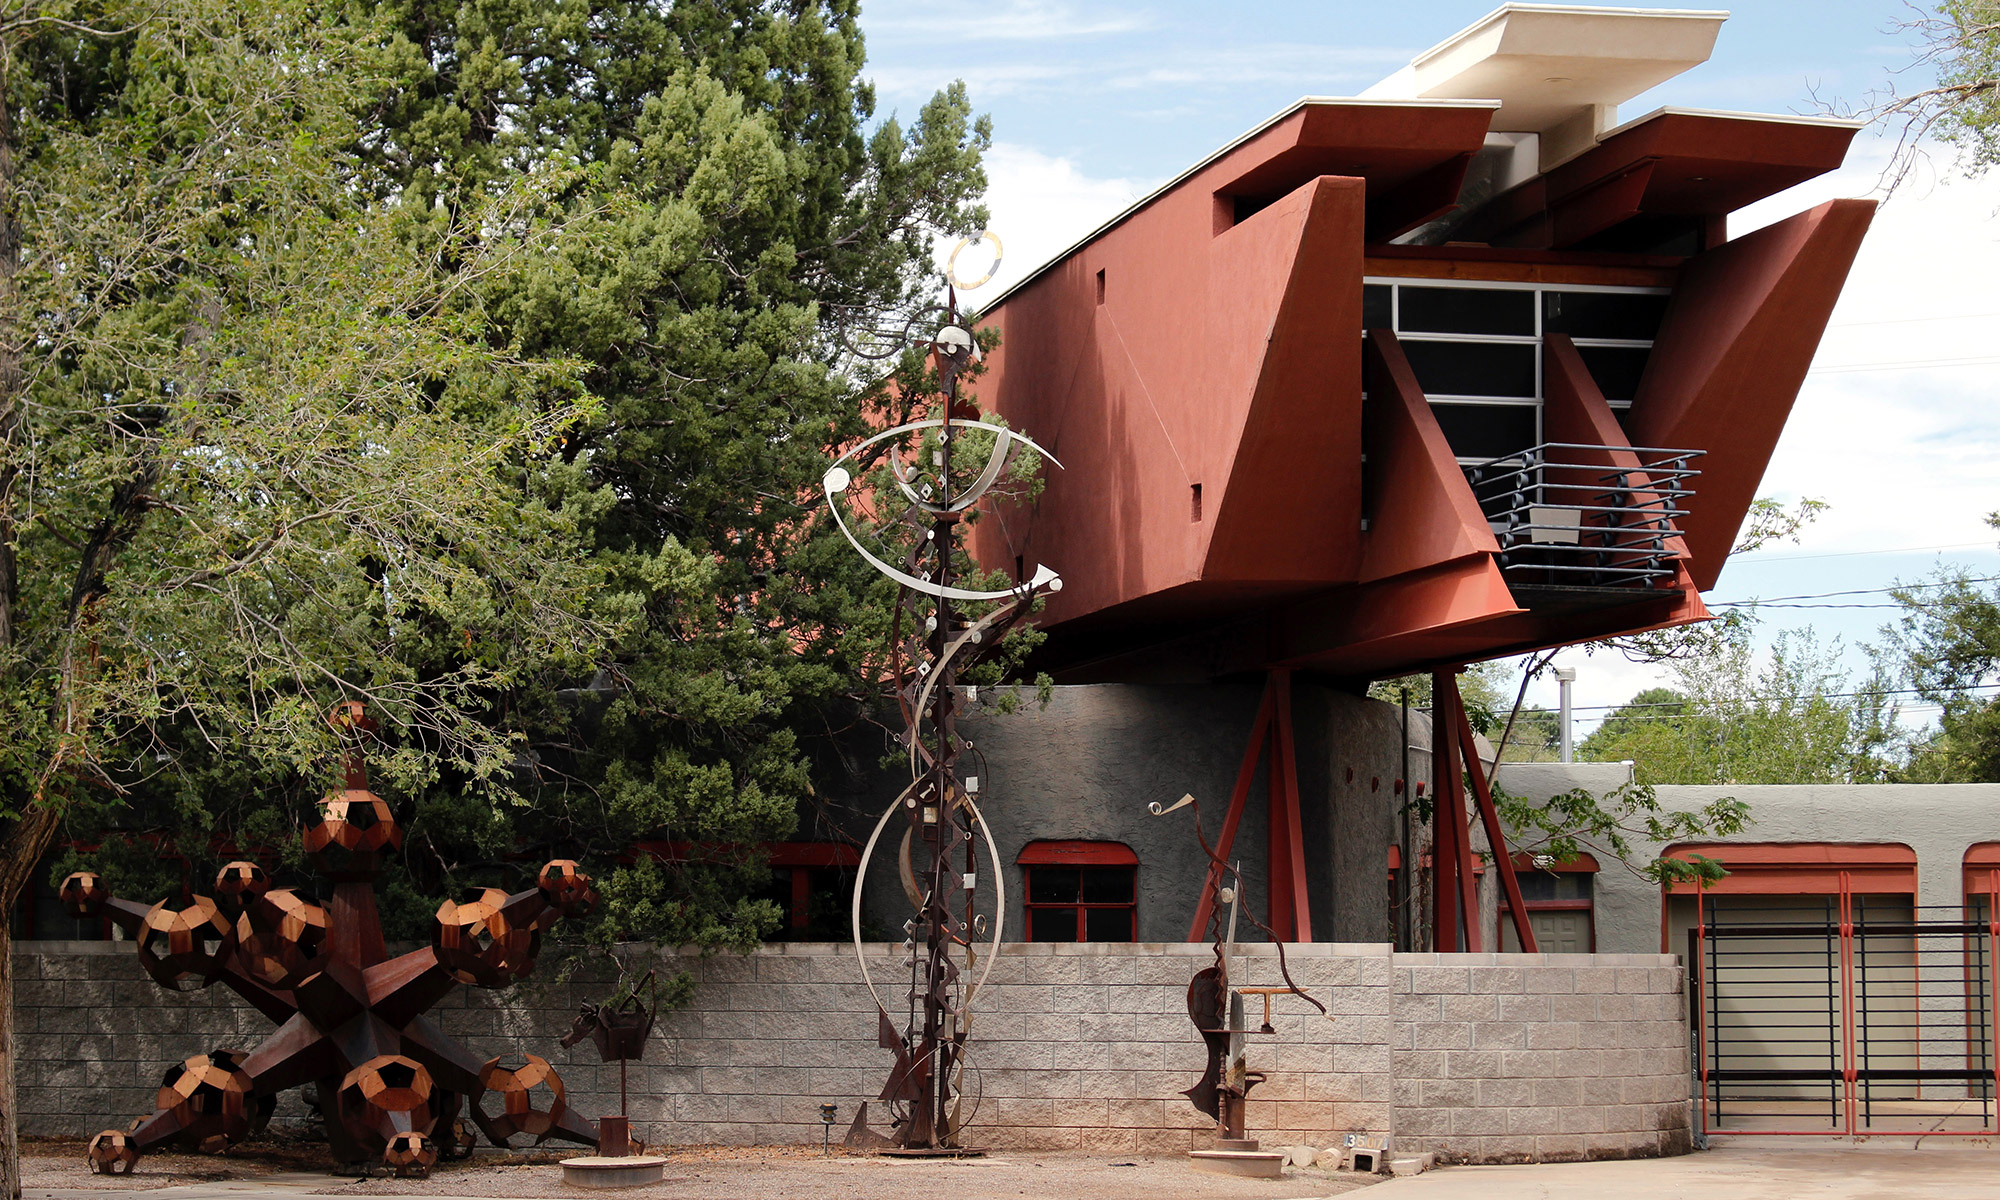 A red stucco home on stilts floating over another, smaller, gray stucco home in Albuquerque